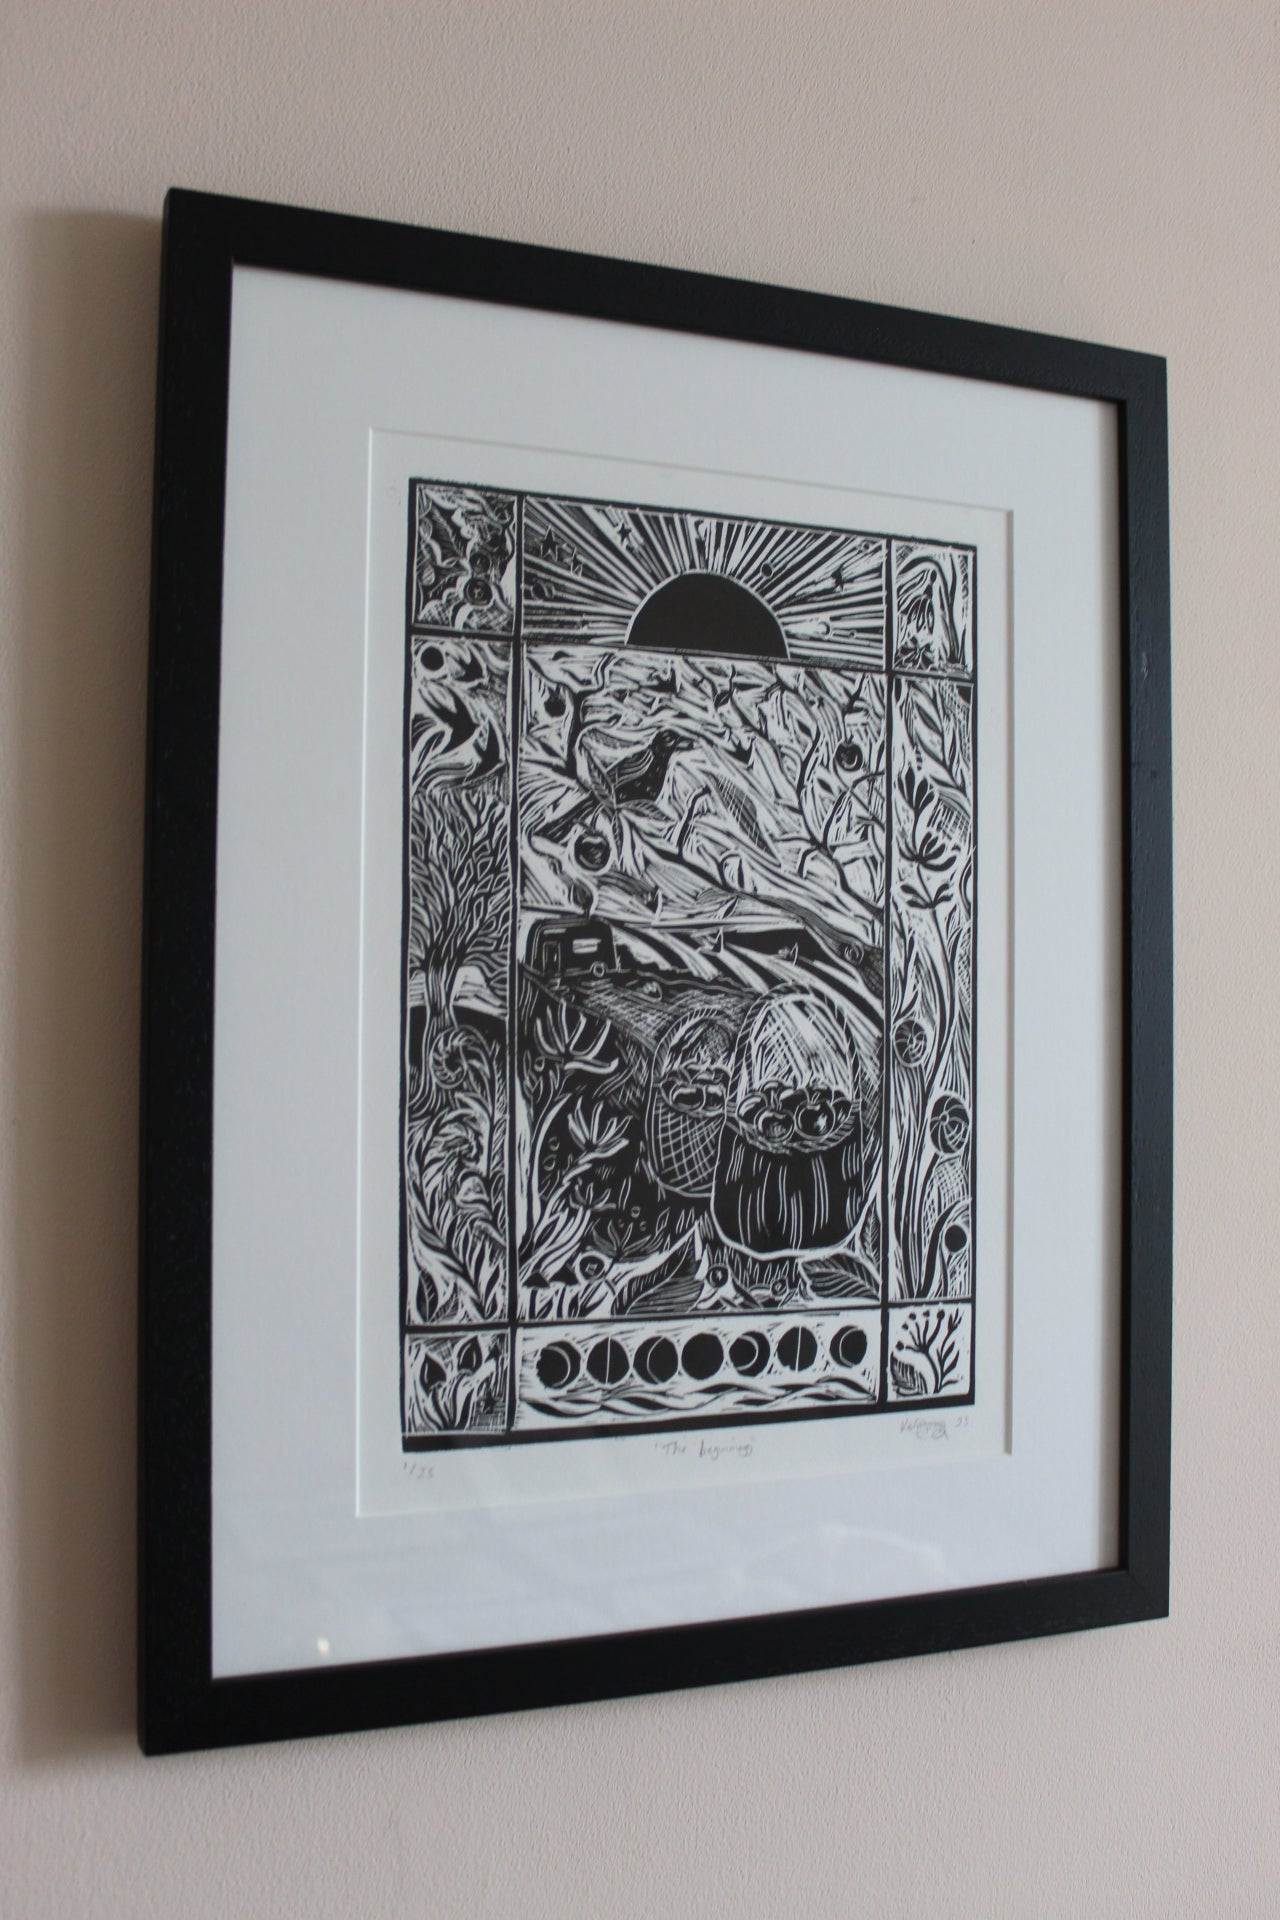 'The beginning' Framed limited edition lino print